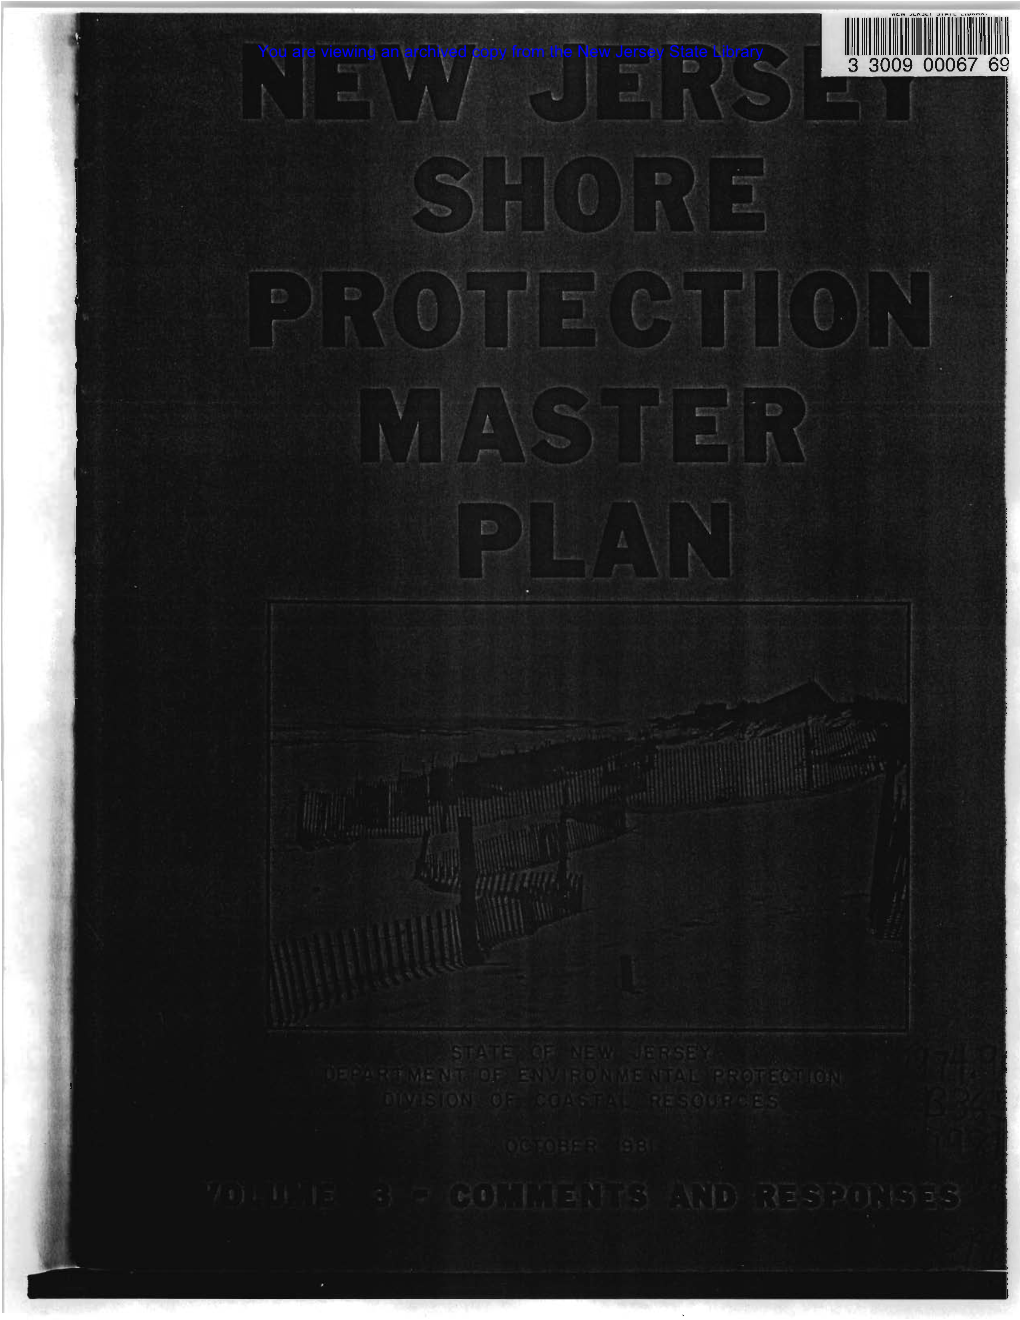 New Jersey Shore Protection Master Plan